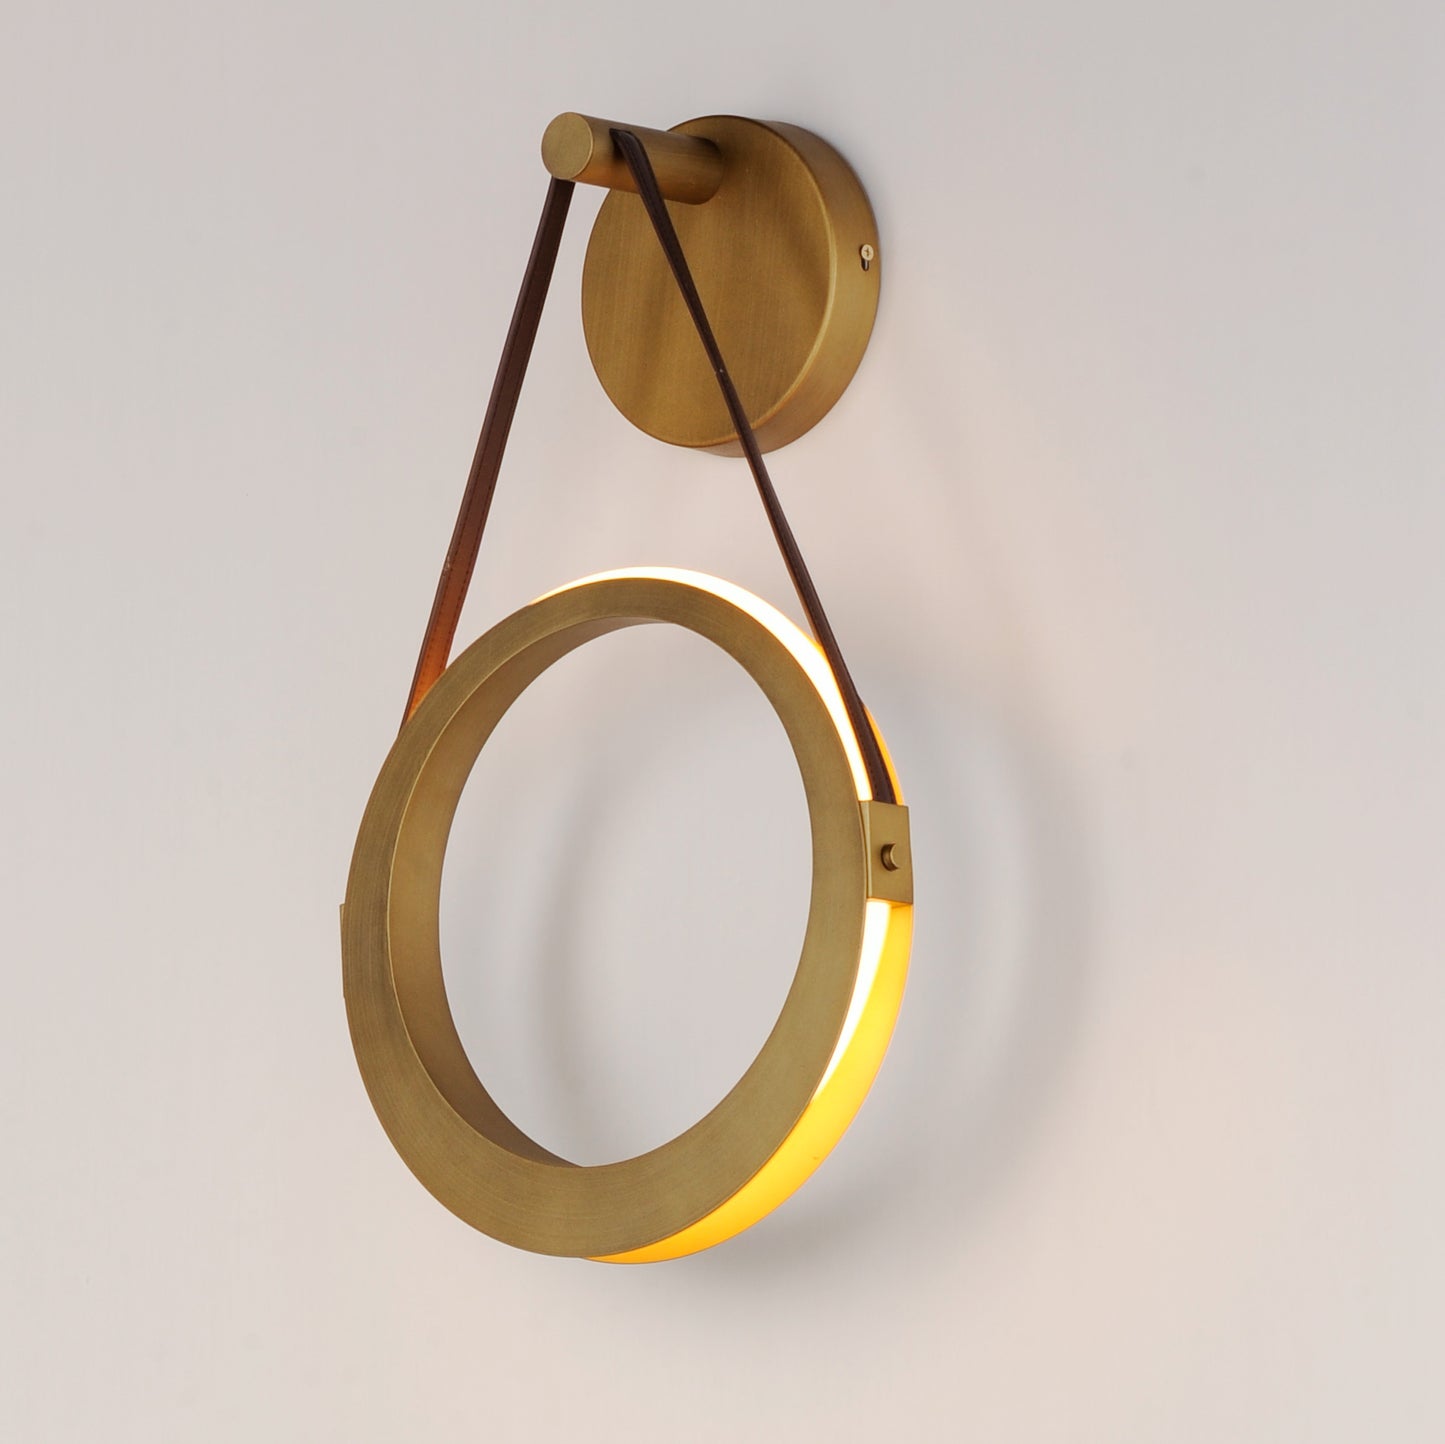 E24080-NAB - Tether 21" Wall Sconce - Natural Aged Brass